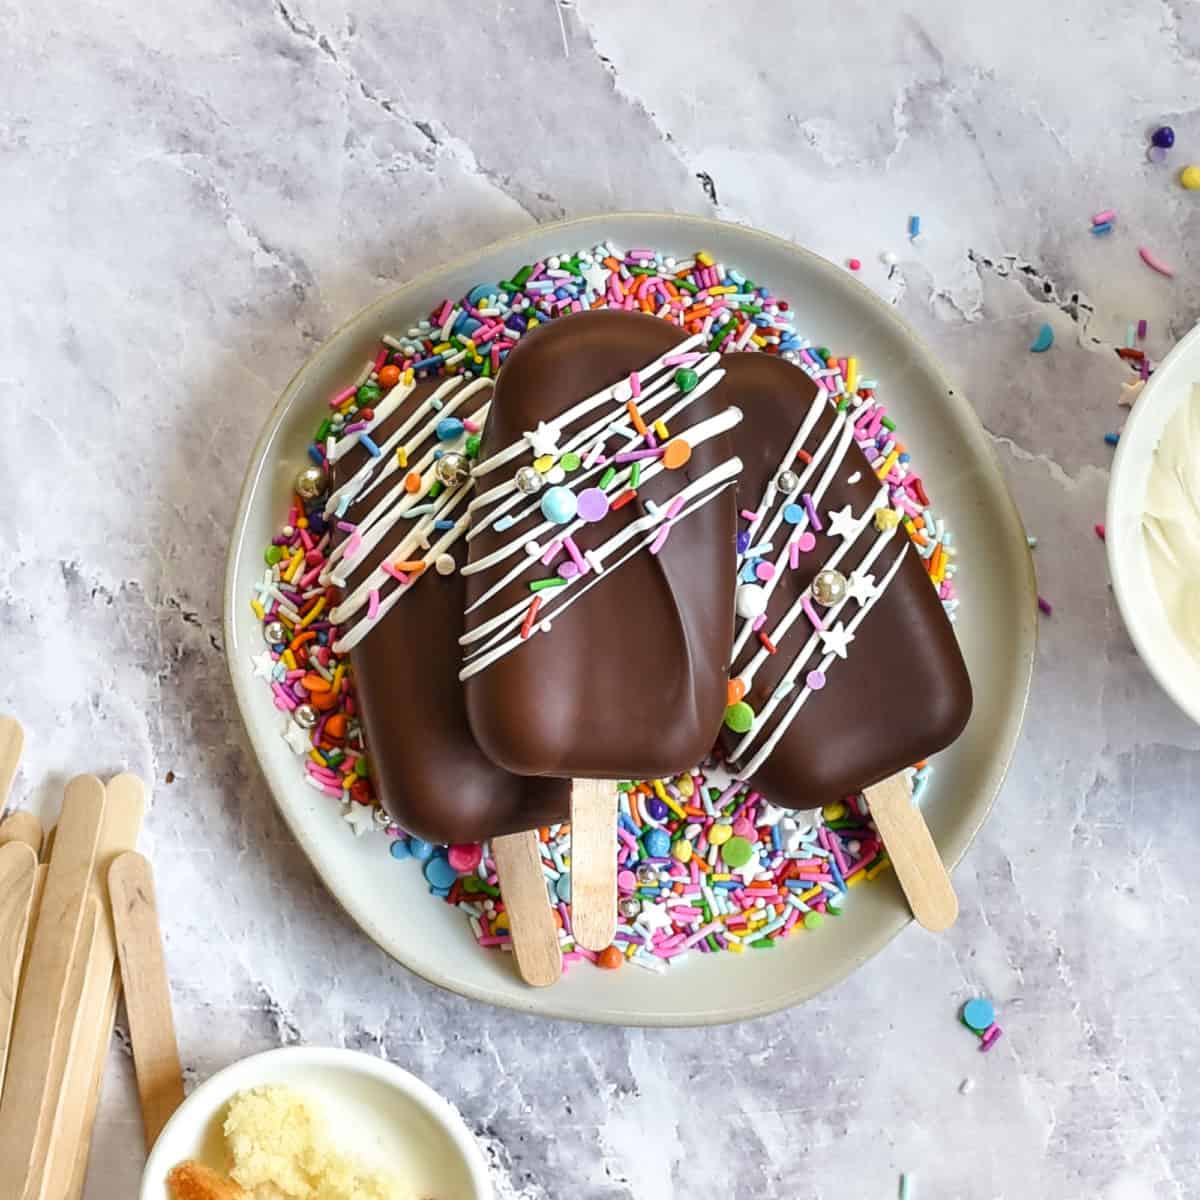 Finished cake popsicles on a plate with sprinkles.